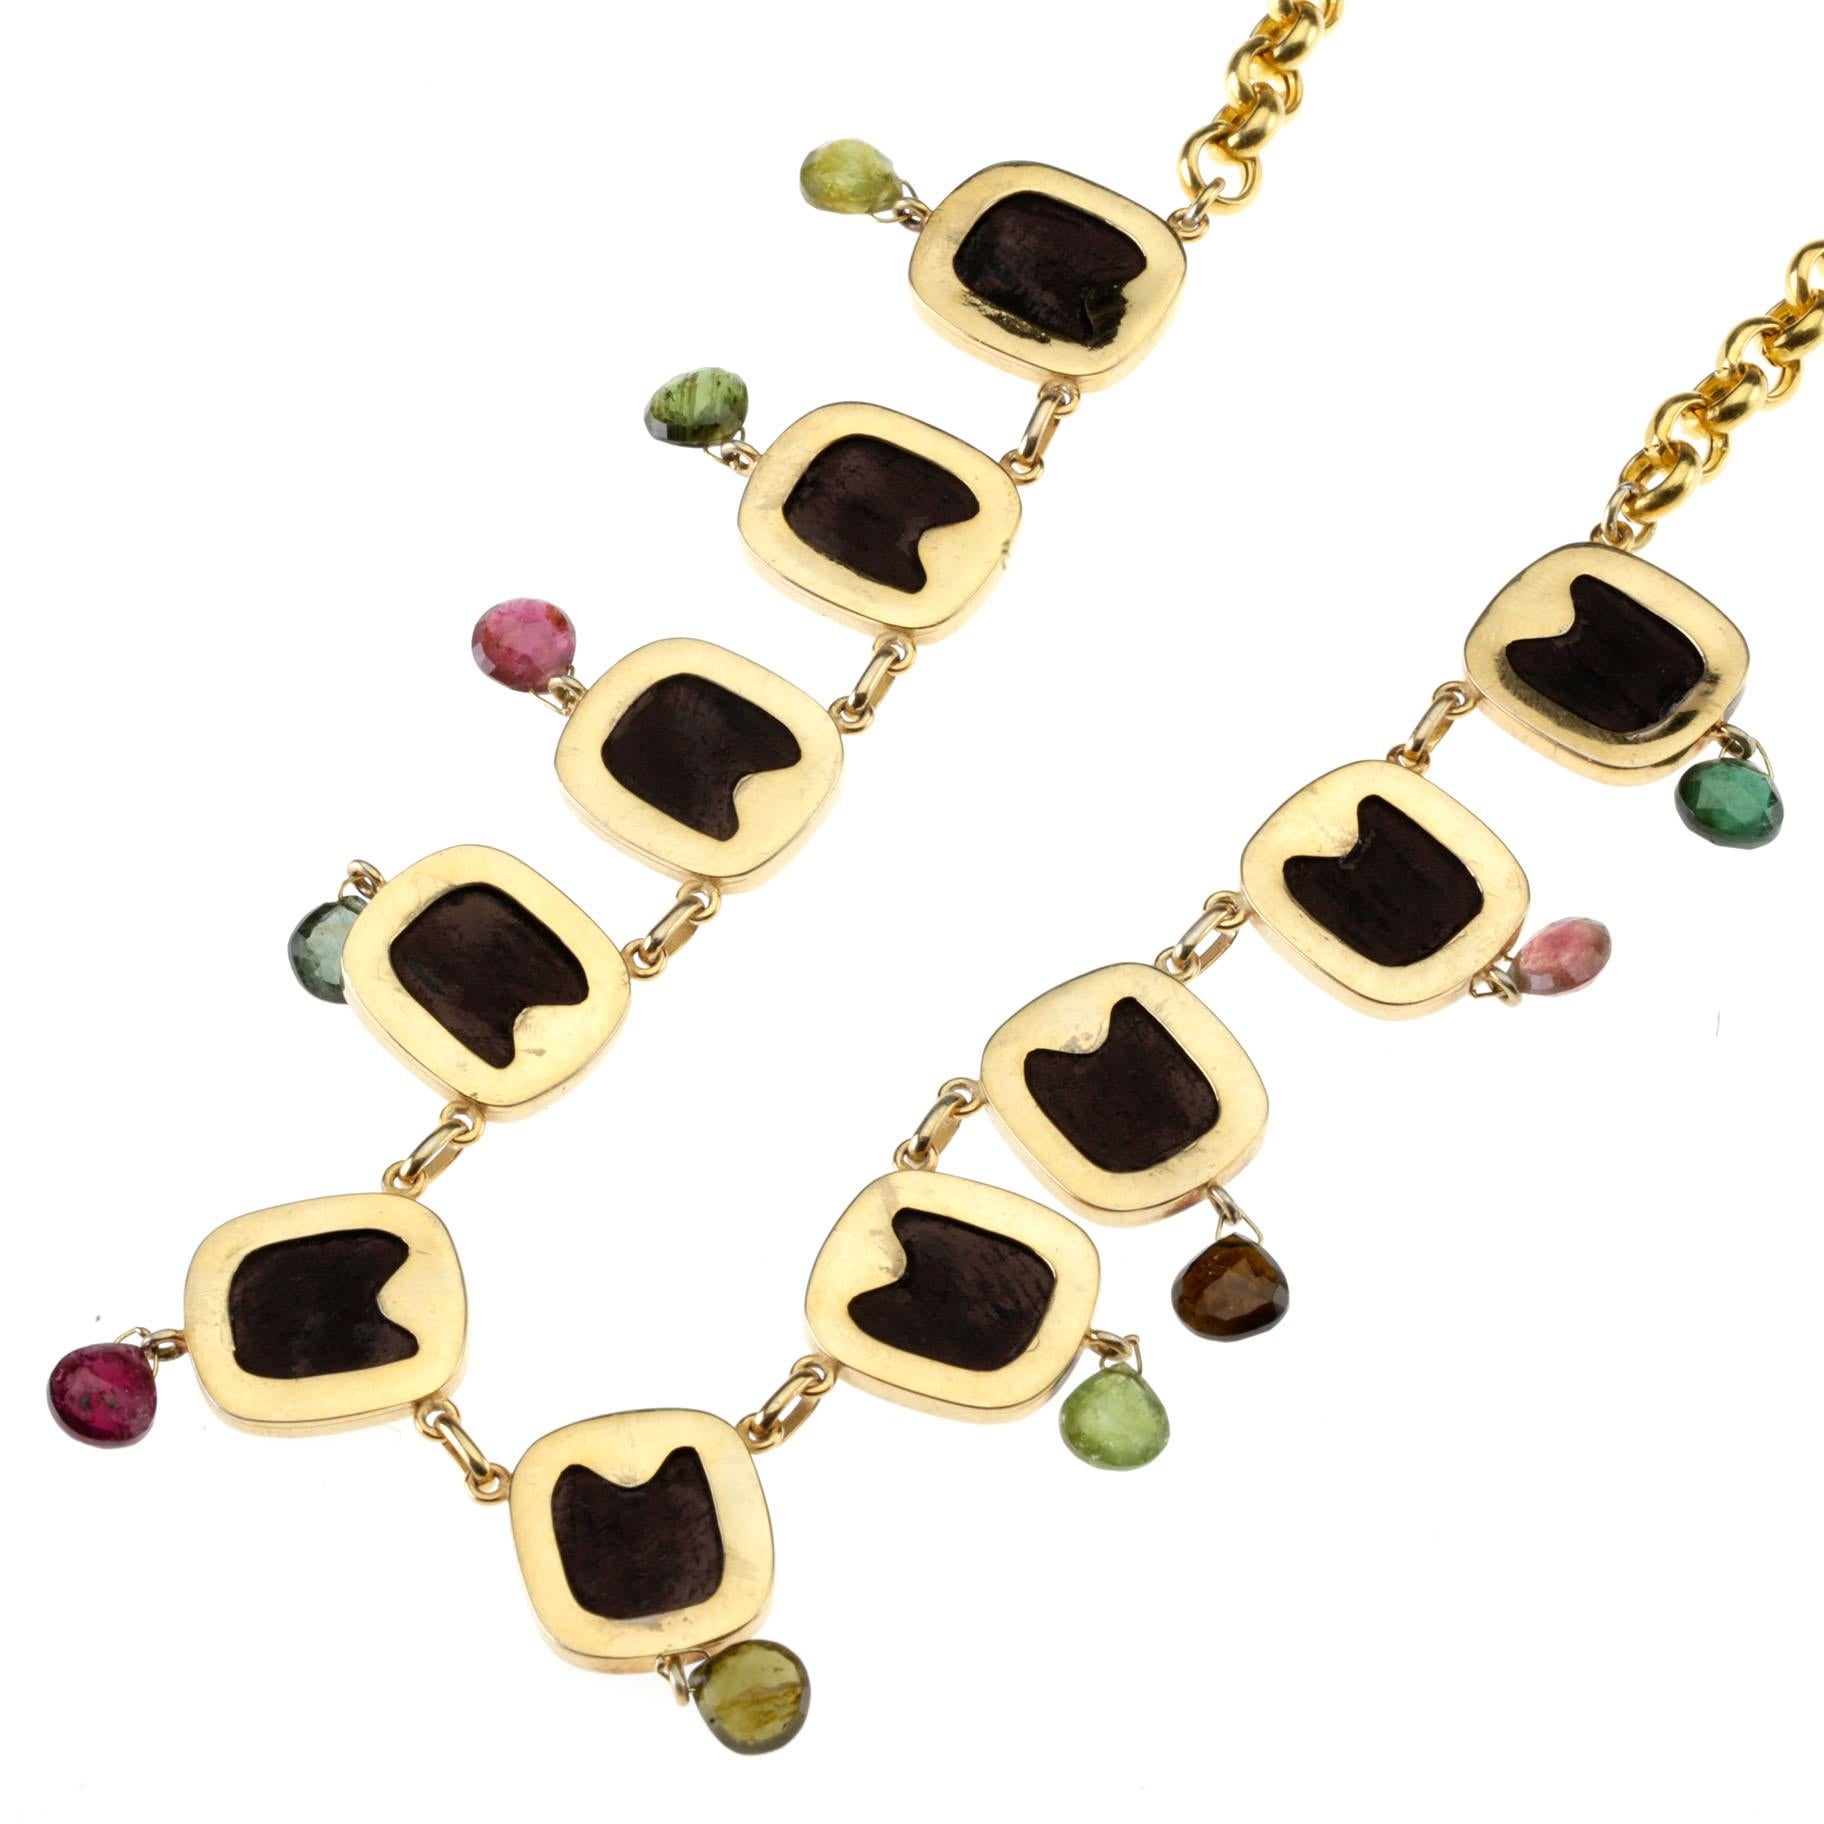 Old sigillum antique glass tourmaline  mixed color bronze necklace adjustable.
All Giulia Colussi jewelry is new and has never been previously owned or worn. Each item will arrive at your door beautifully gift wrapped in our boxes, put inside an